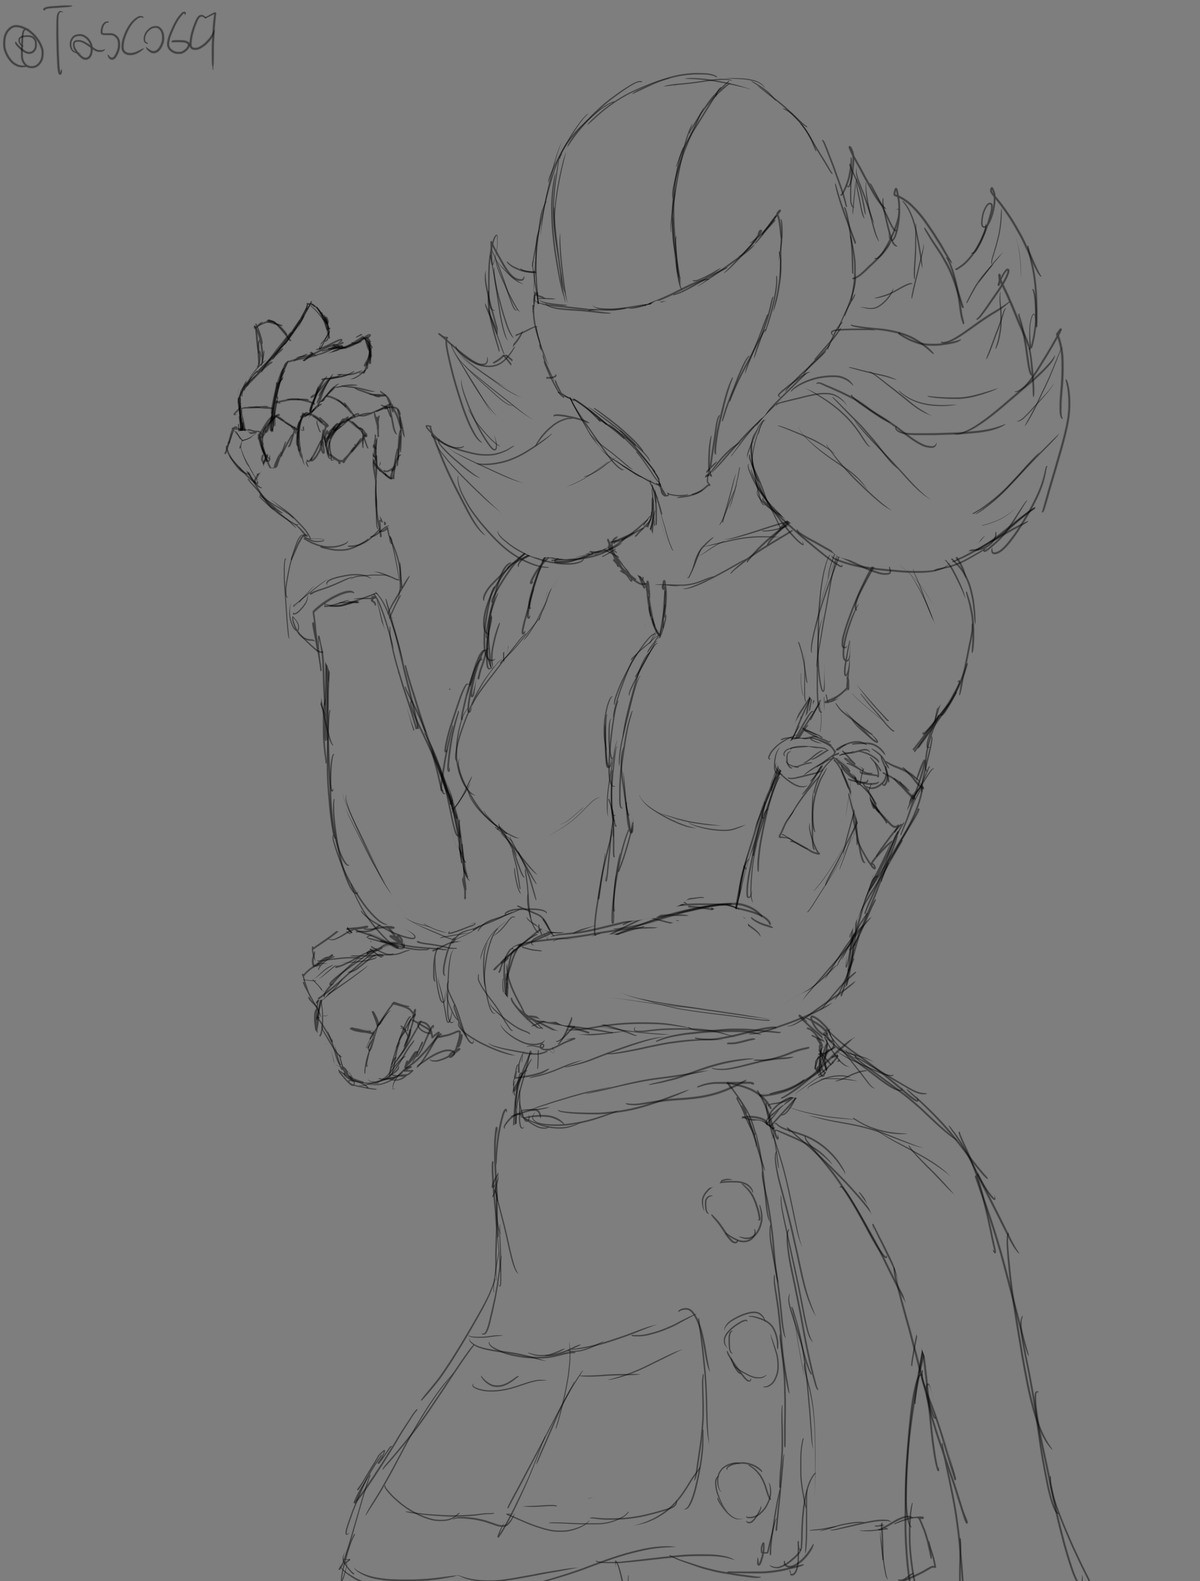 DailyDrawing day 230. tired. it has been a very long day and im super tired so just a sketch. I love my Xenoverse character and the helmet will always stay on j